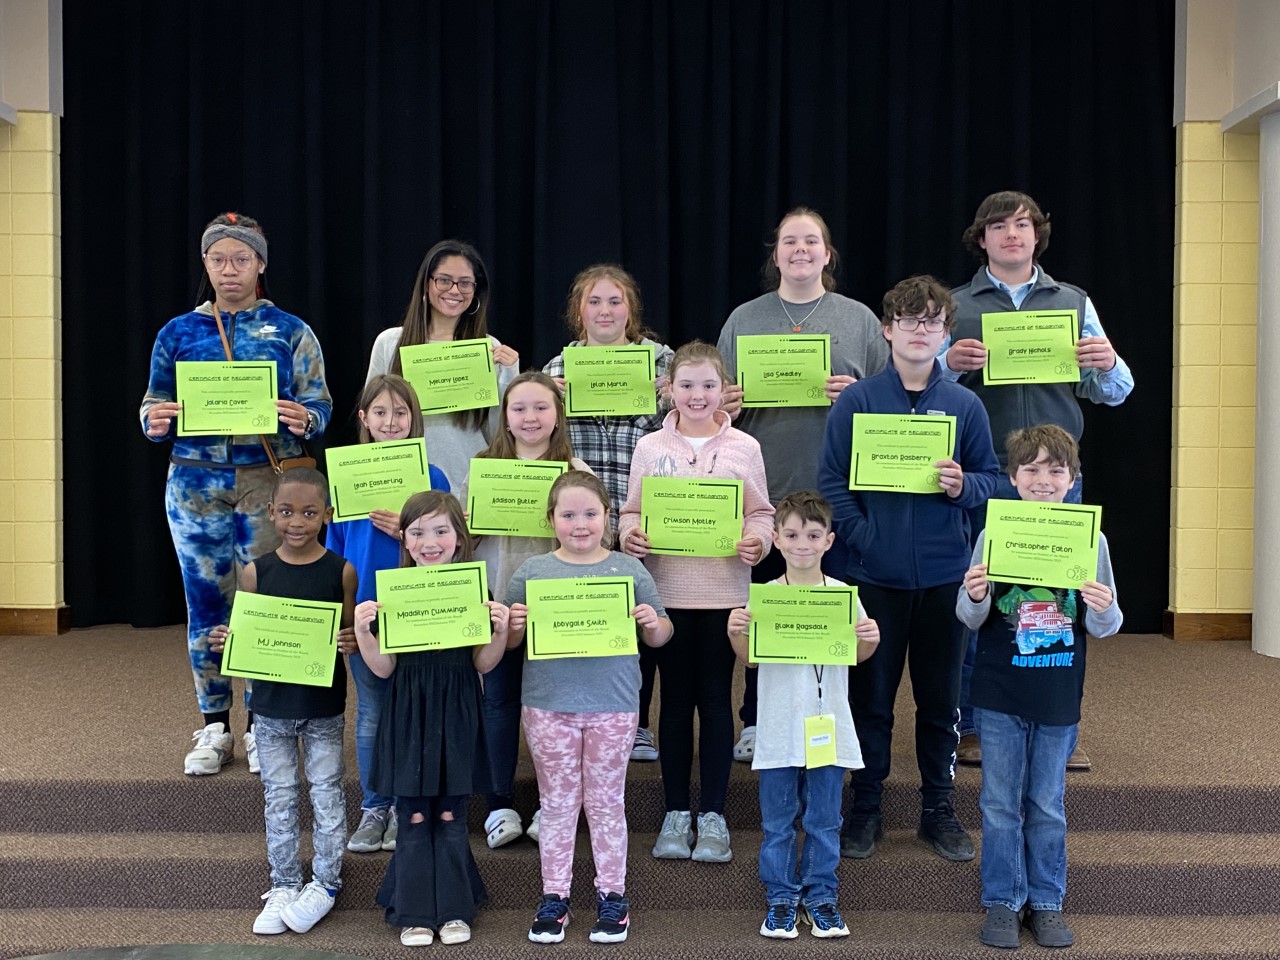 December and January Students of the Month